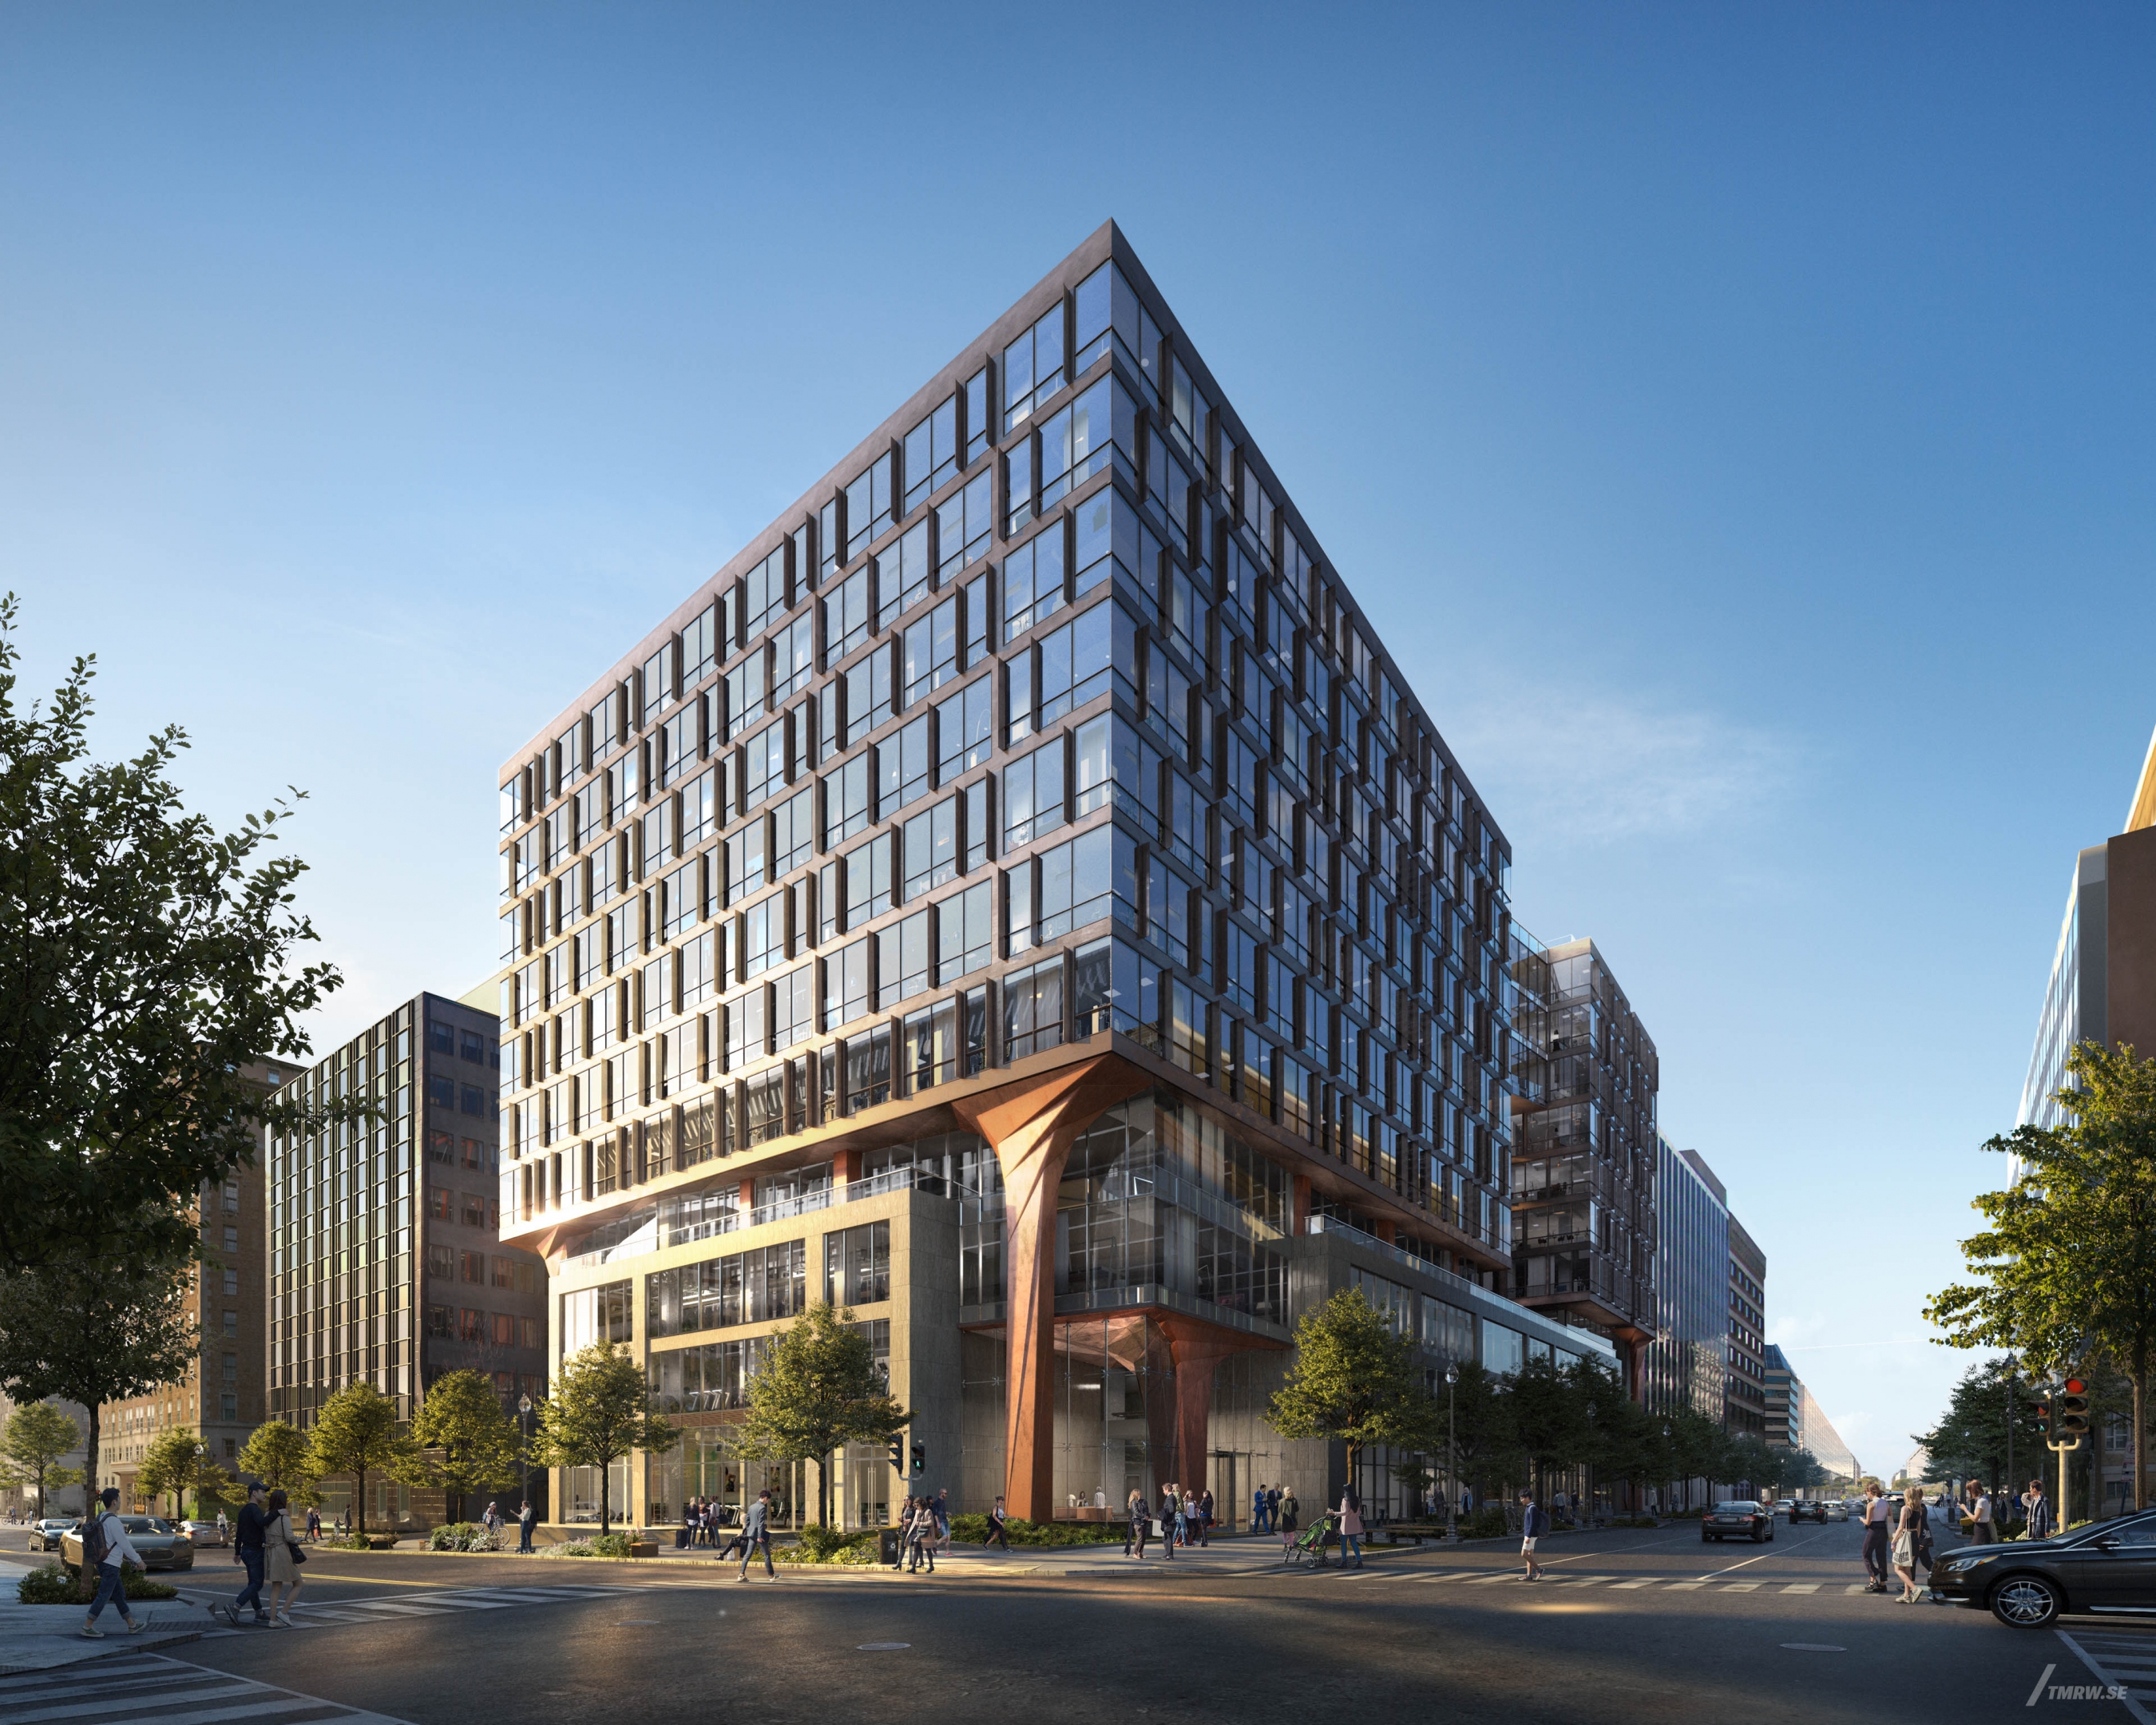 Architectural visualization of 1700M Street for Studios, exterior of an office building in daylight from a street view